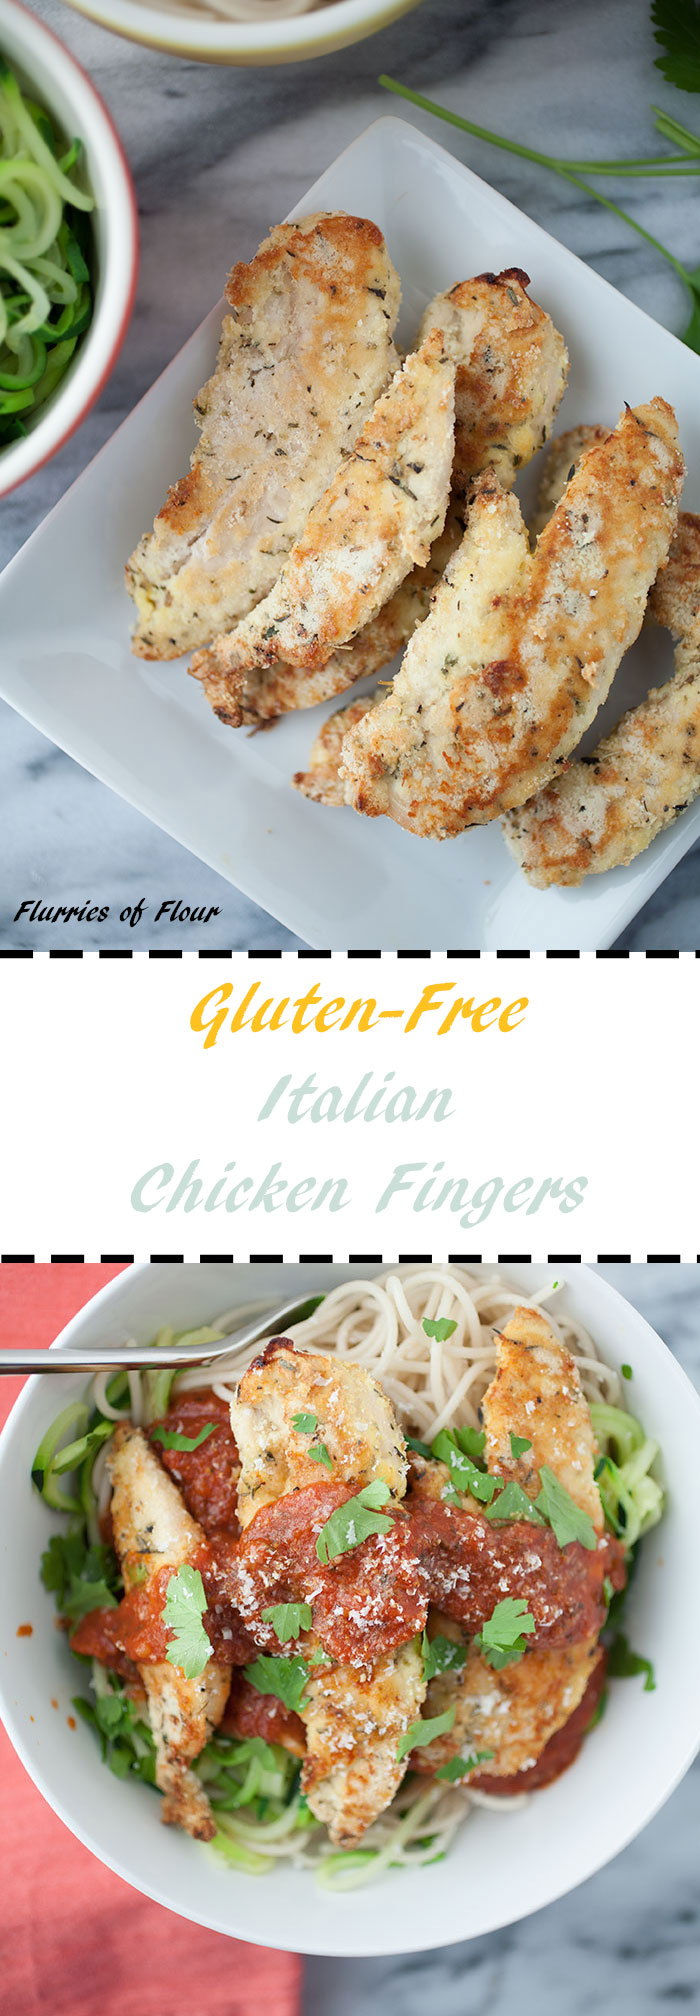 These gluten-free Italian chicken fingers make the perfect weeknight meal—healthy, quick, easy, delicious, and done in under an hour!